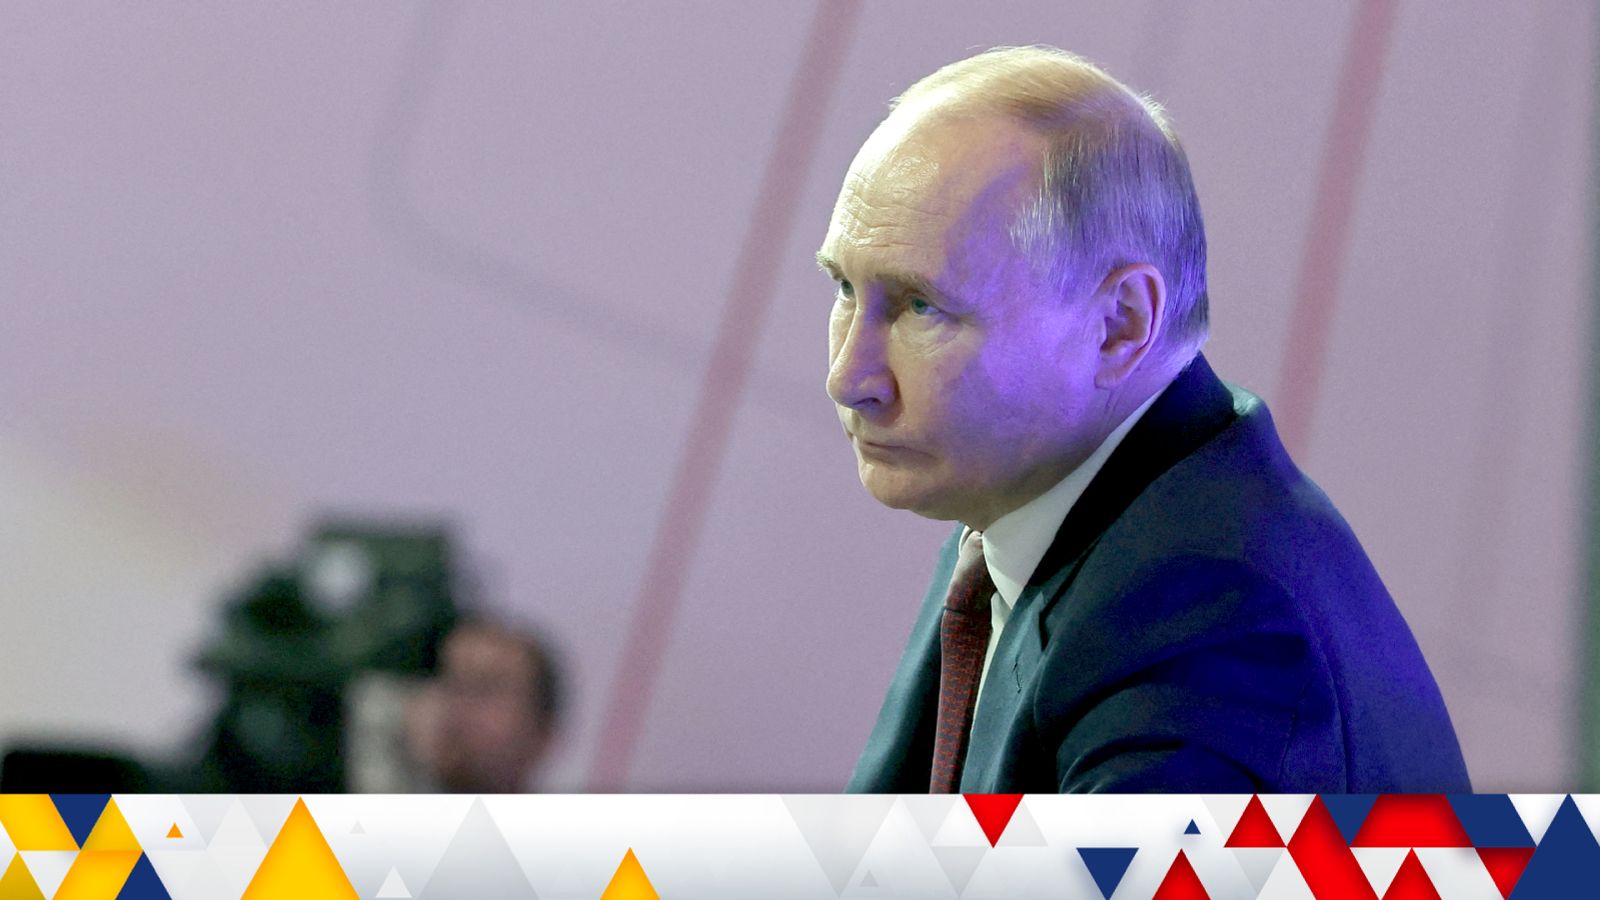 Latest news on Ukraine war: Putin’s ‘ridiculous’ attempt to charm the West; world leaders urge truce for Olympics | Global updates